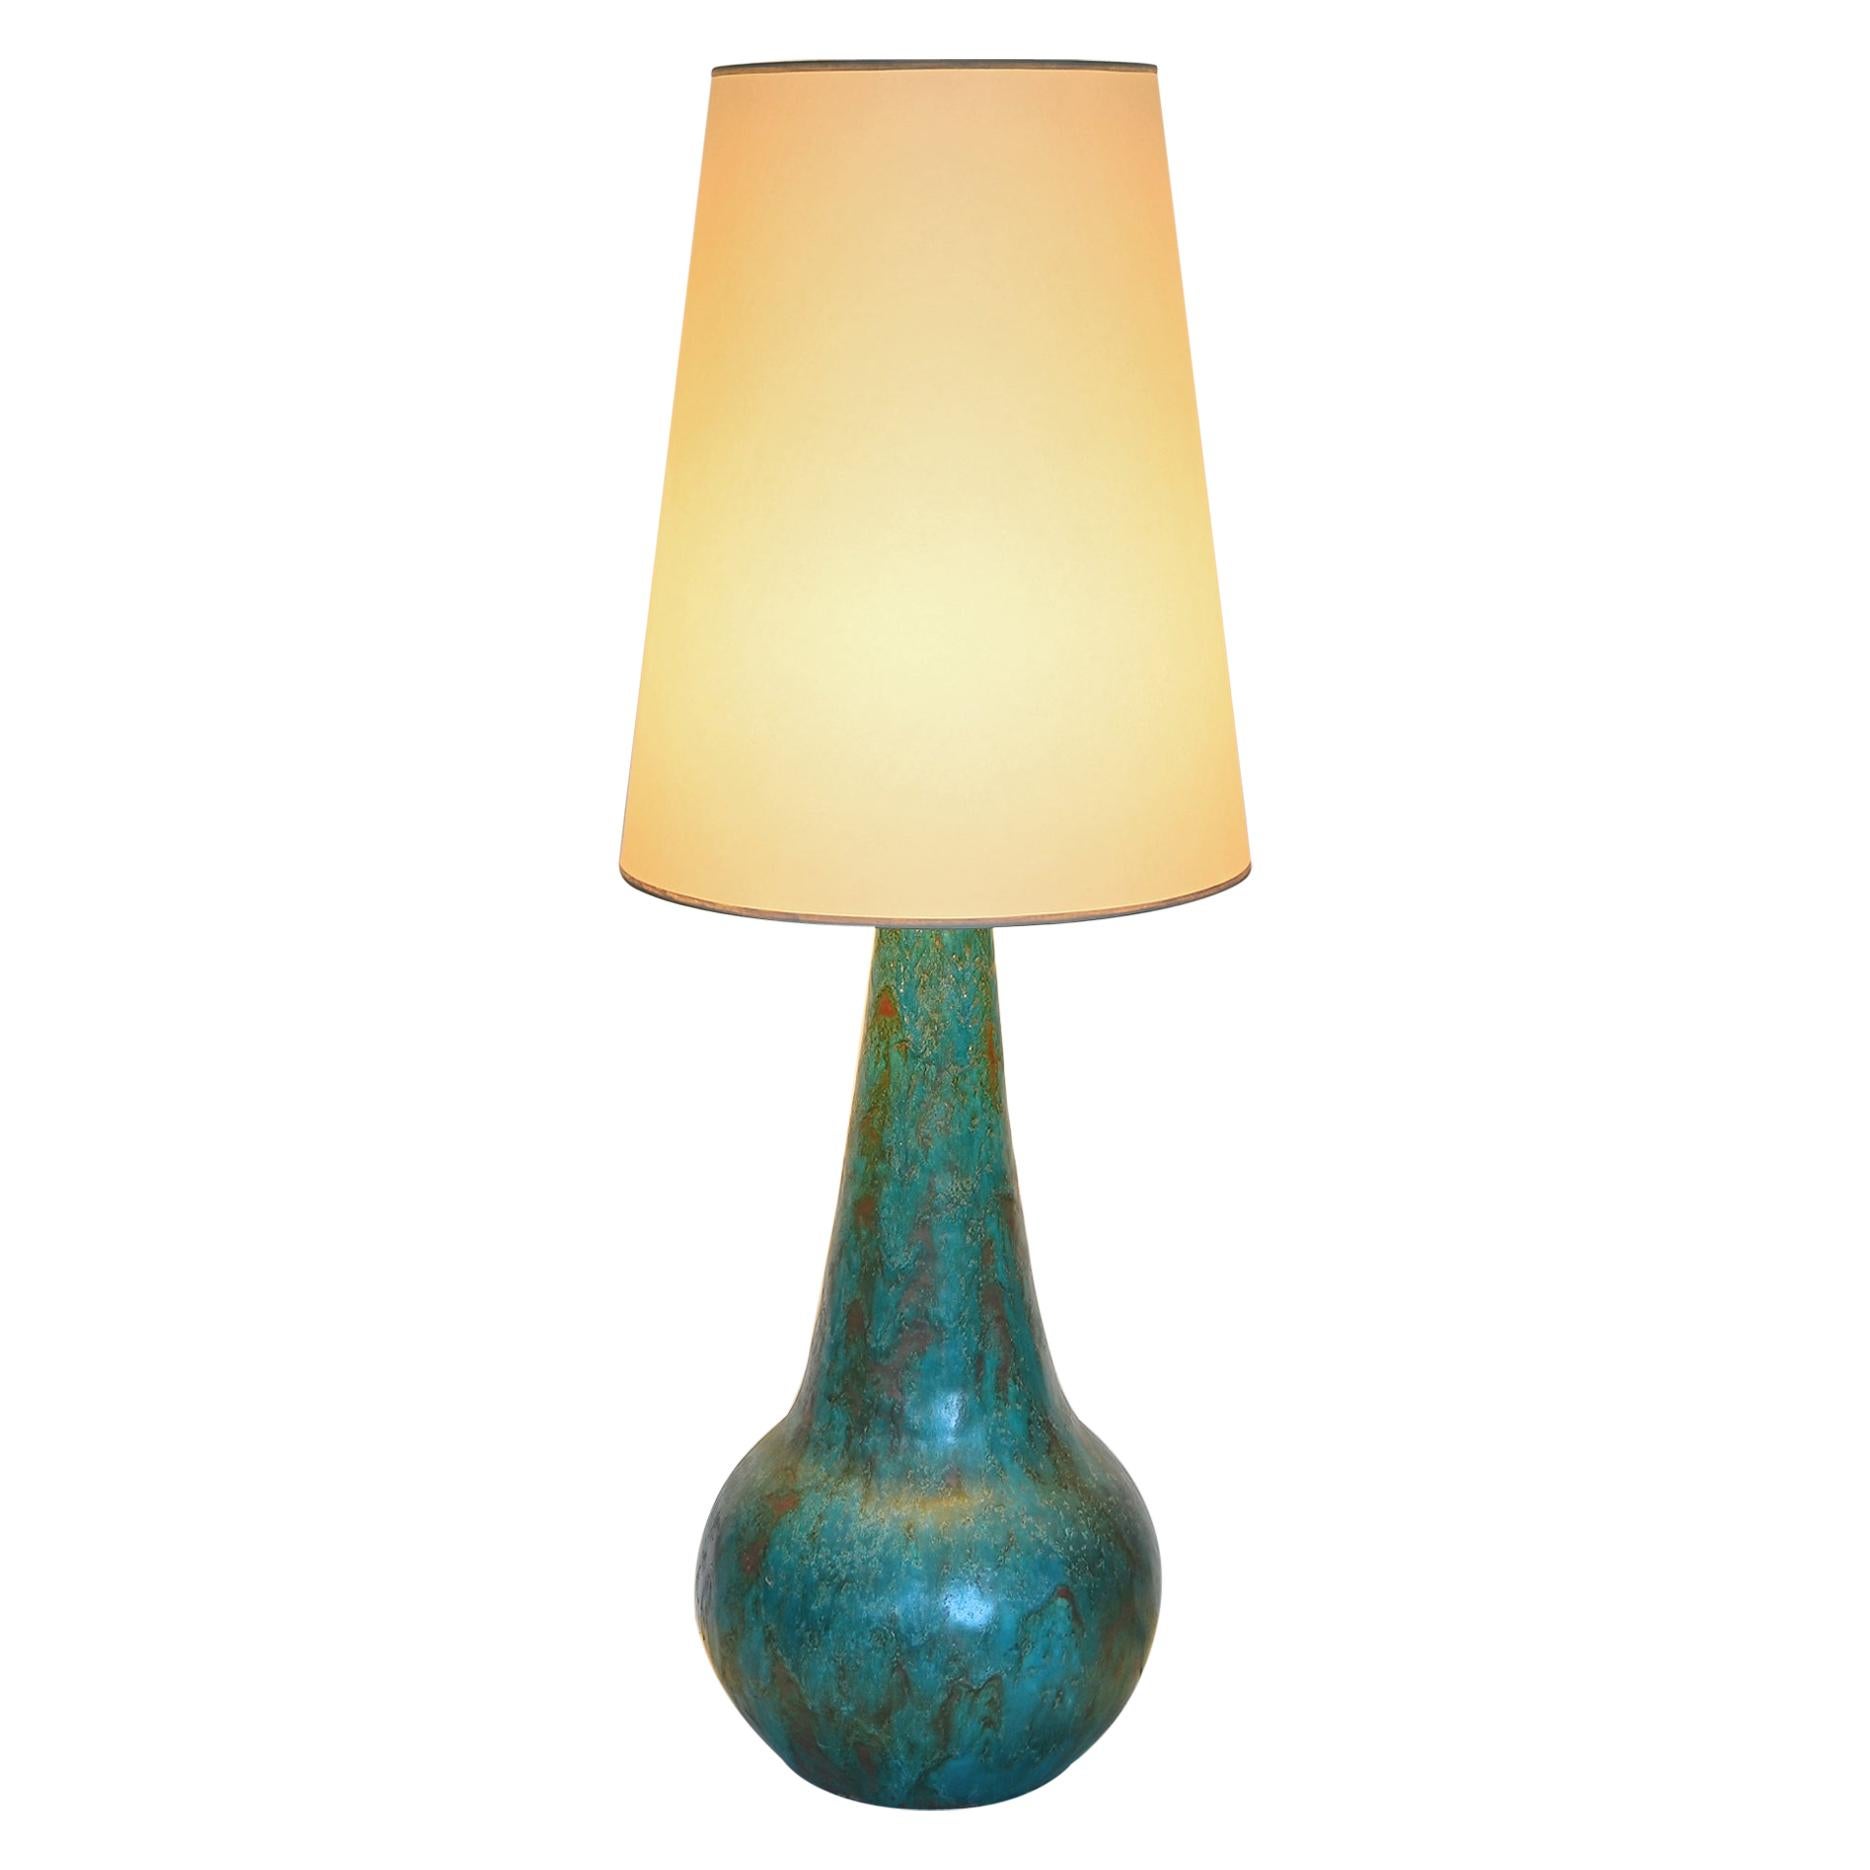 Pottery Blue Handcrafted Table Lamp German 1970 Adjustable Studio Lamp